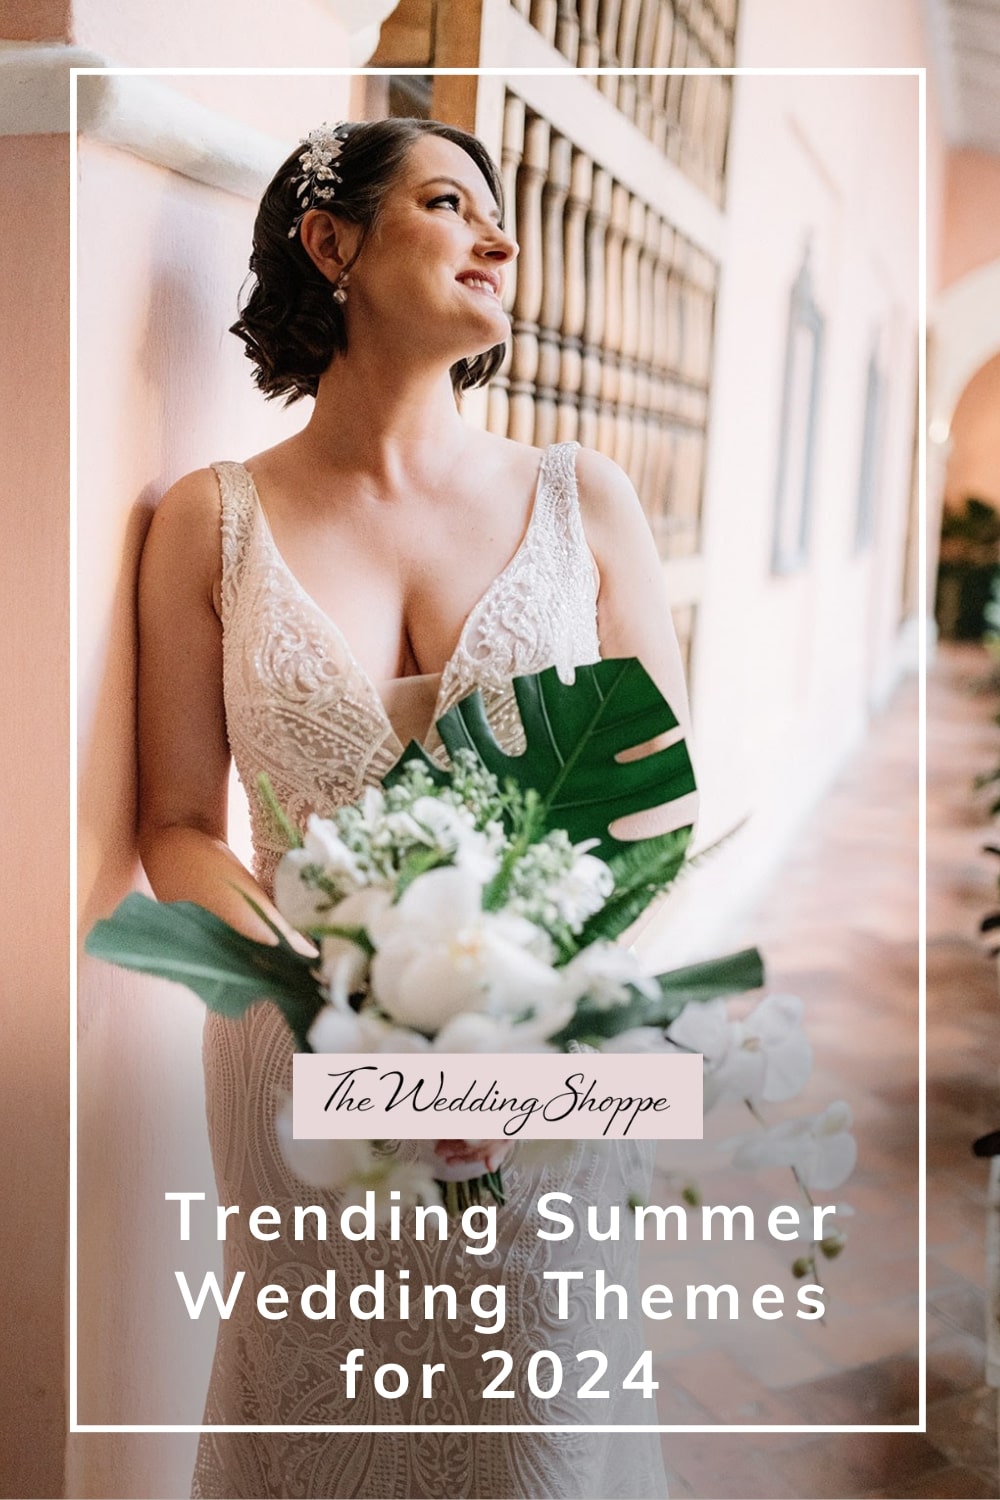 pinnable graphic for "Trending Summer Wedding Themes for 2024" from The Wedding Shoppe